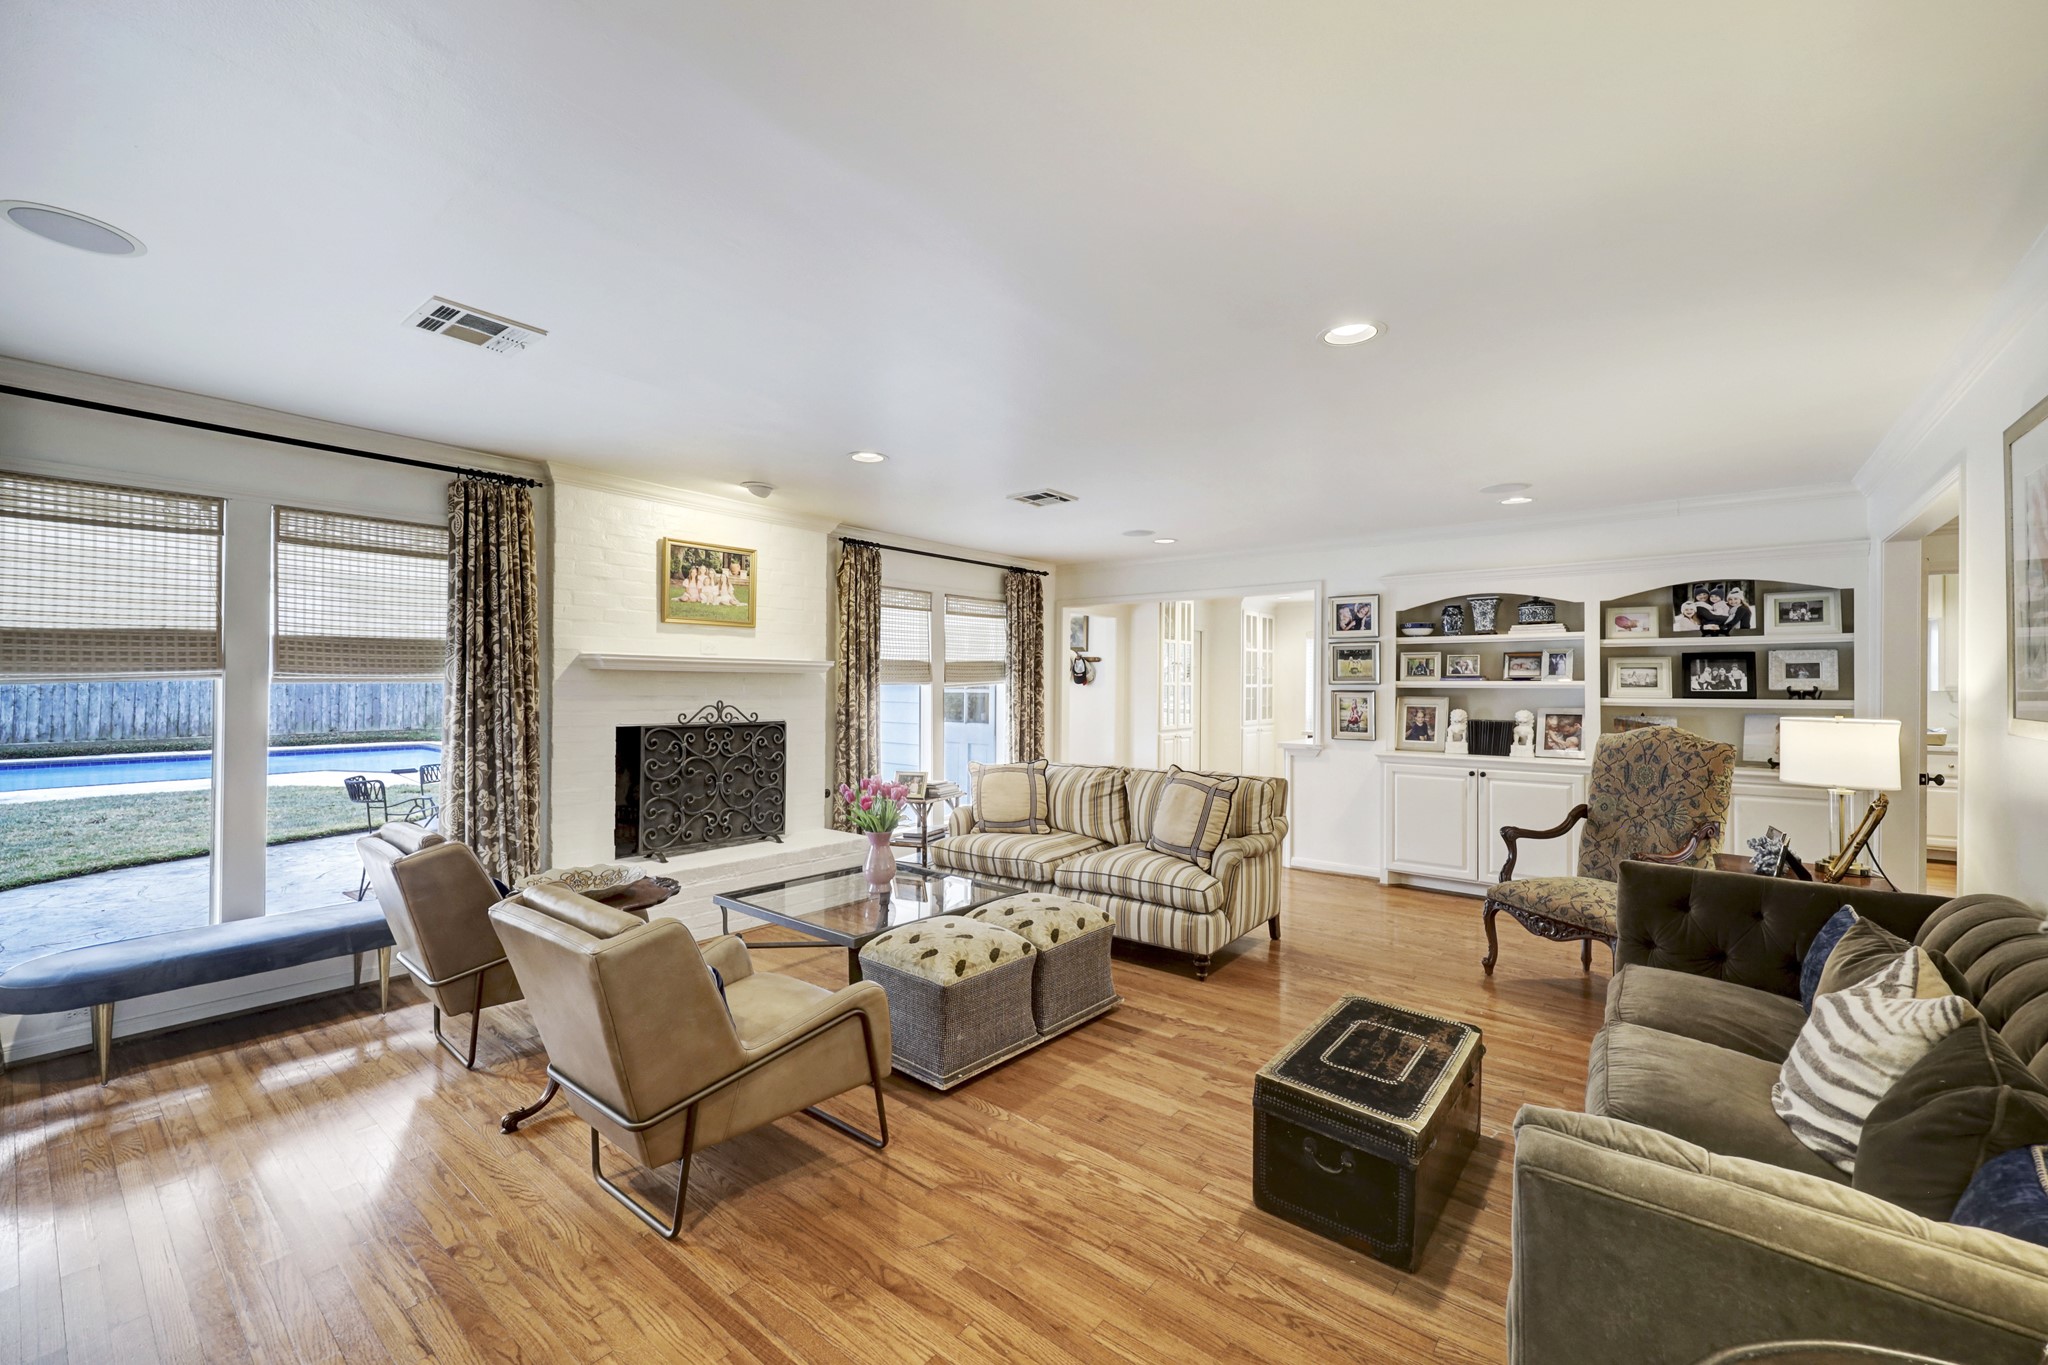 The family room surrounds a wood burning fireplace and boasts windows on either side overlooking the pool.